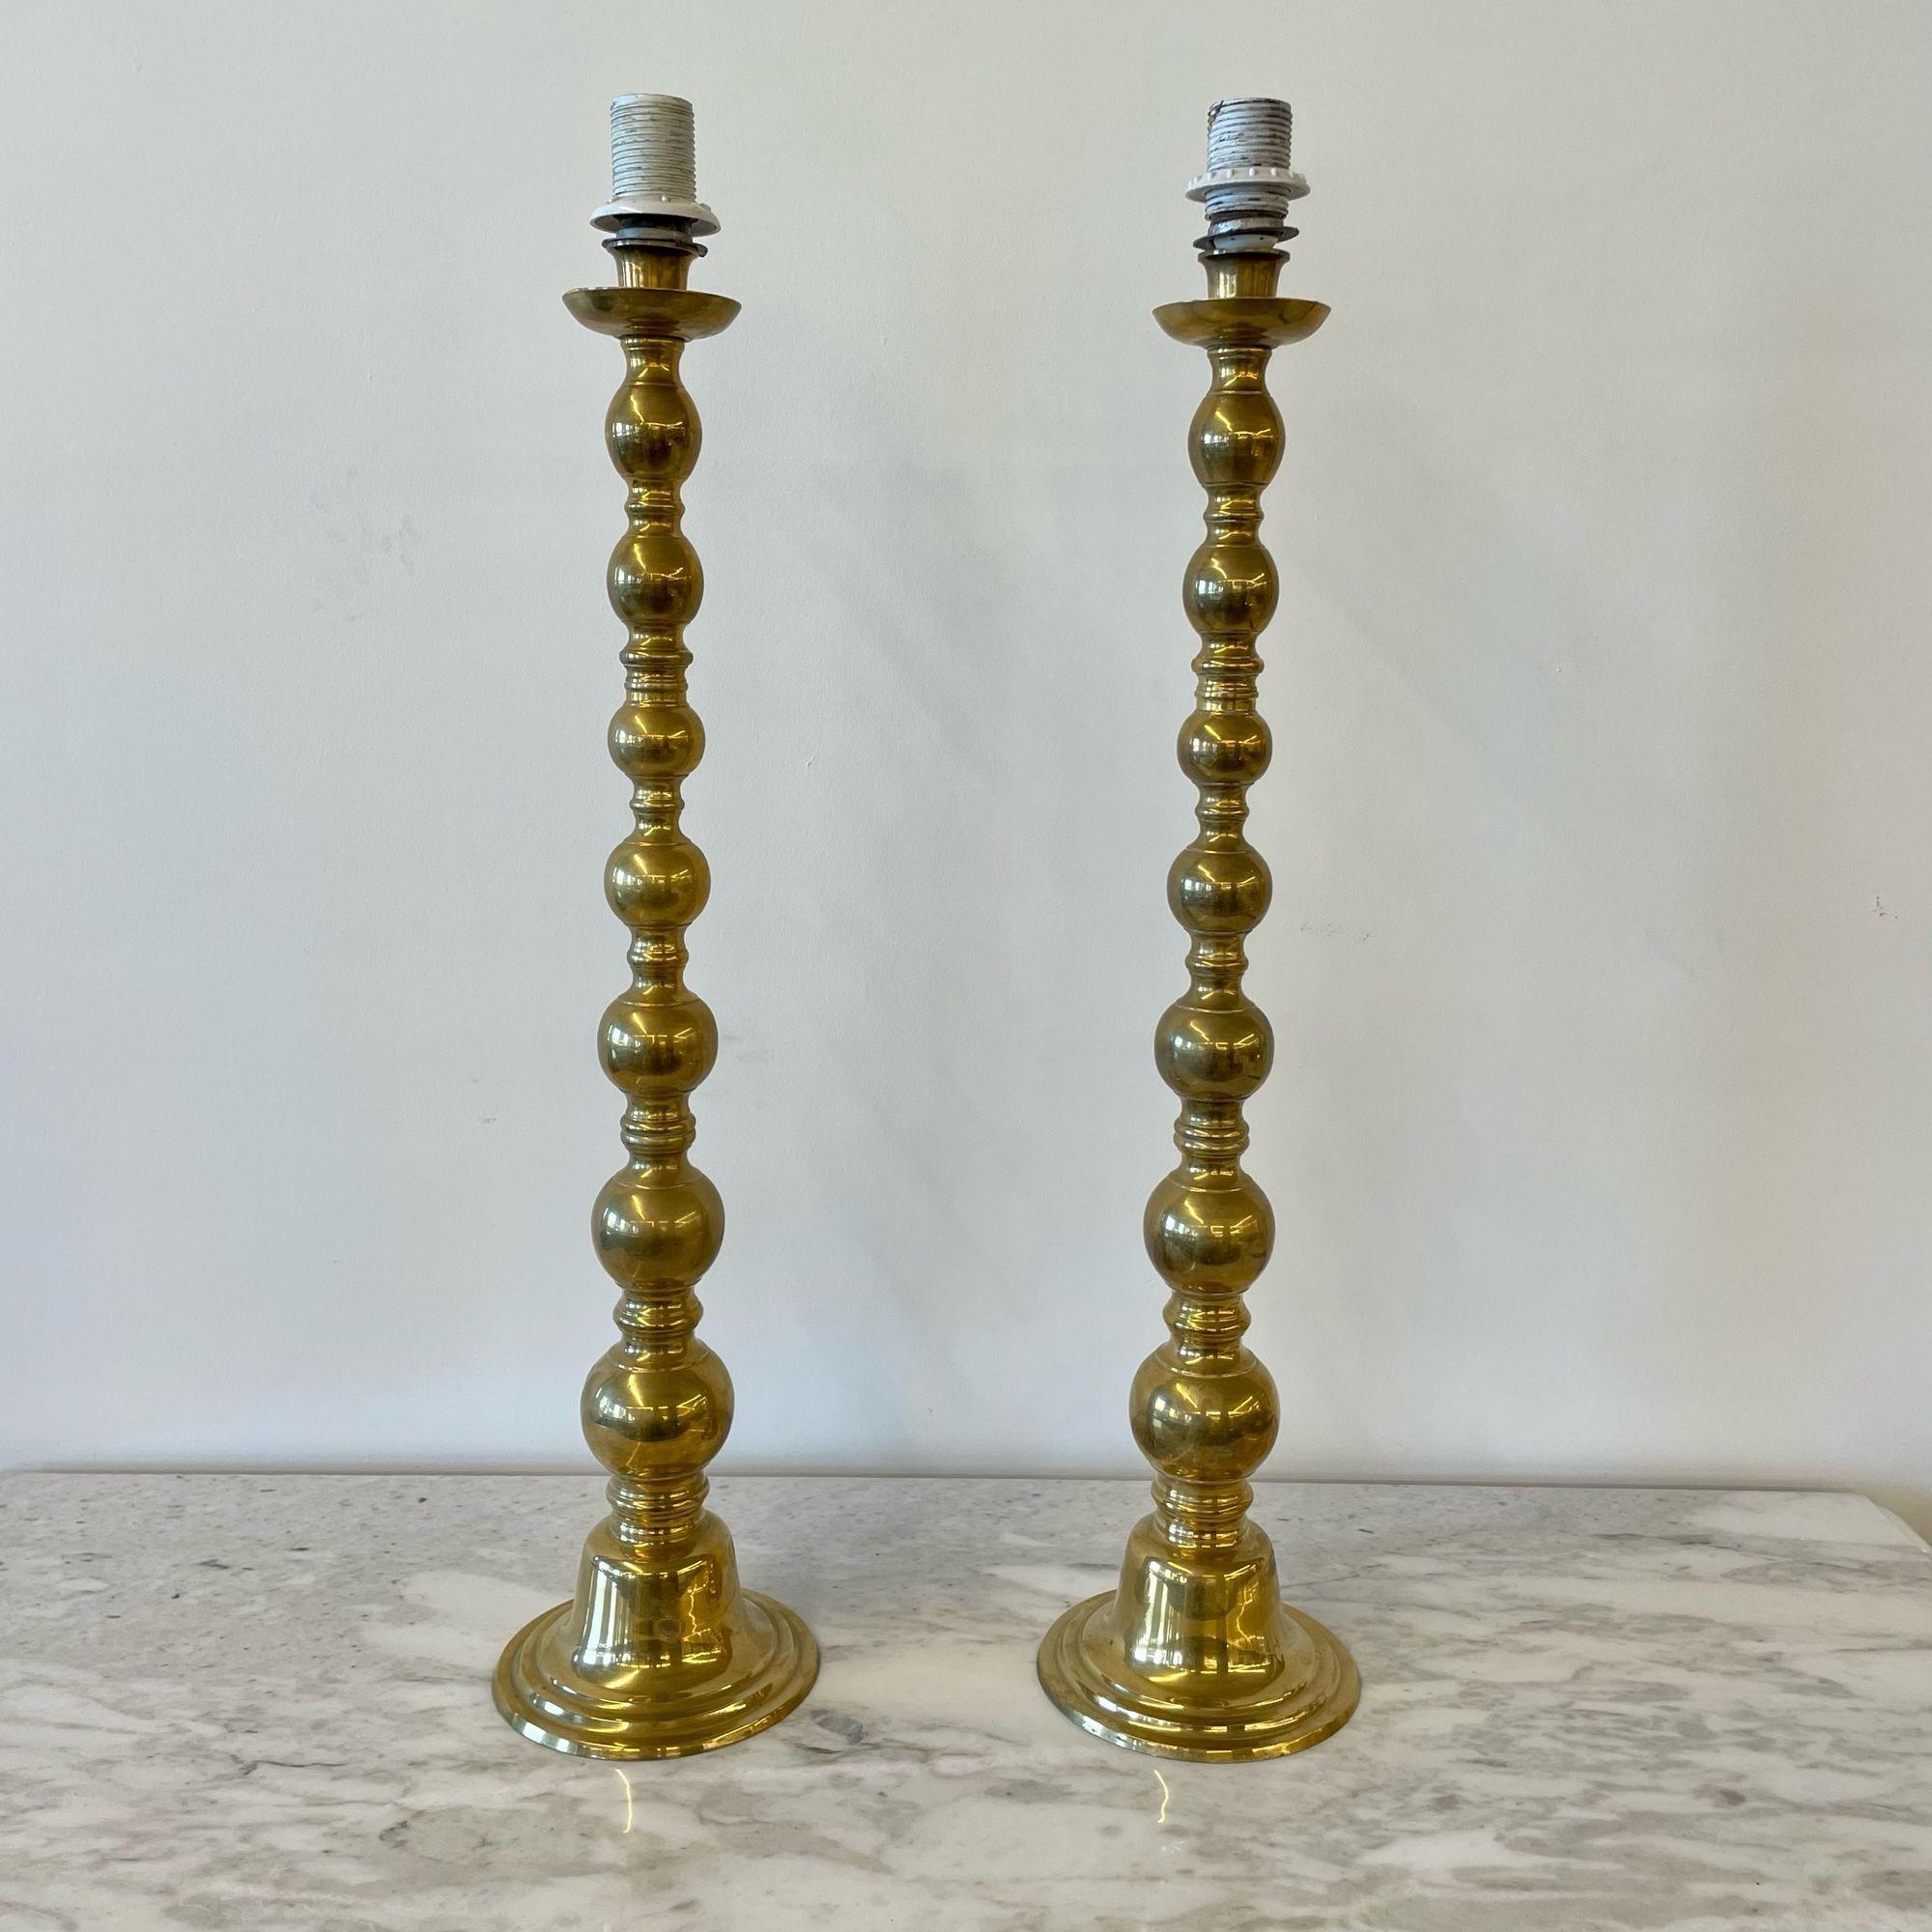 Pair of Hollywood Regency Solid Brass Drum shape table lamps, Neoclassical Style
 
Brass, Steel
 
 
30.5 H x 6.5 Dia
2 x e26 edison base sockets
needs rewiring / shades not included.